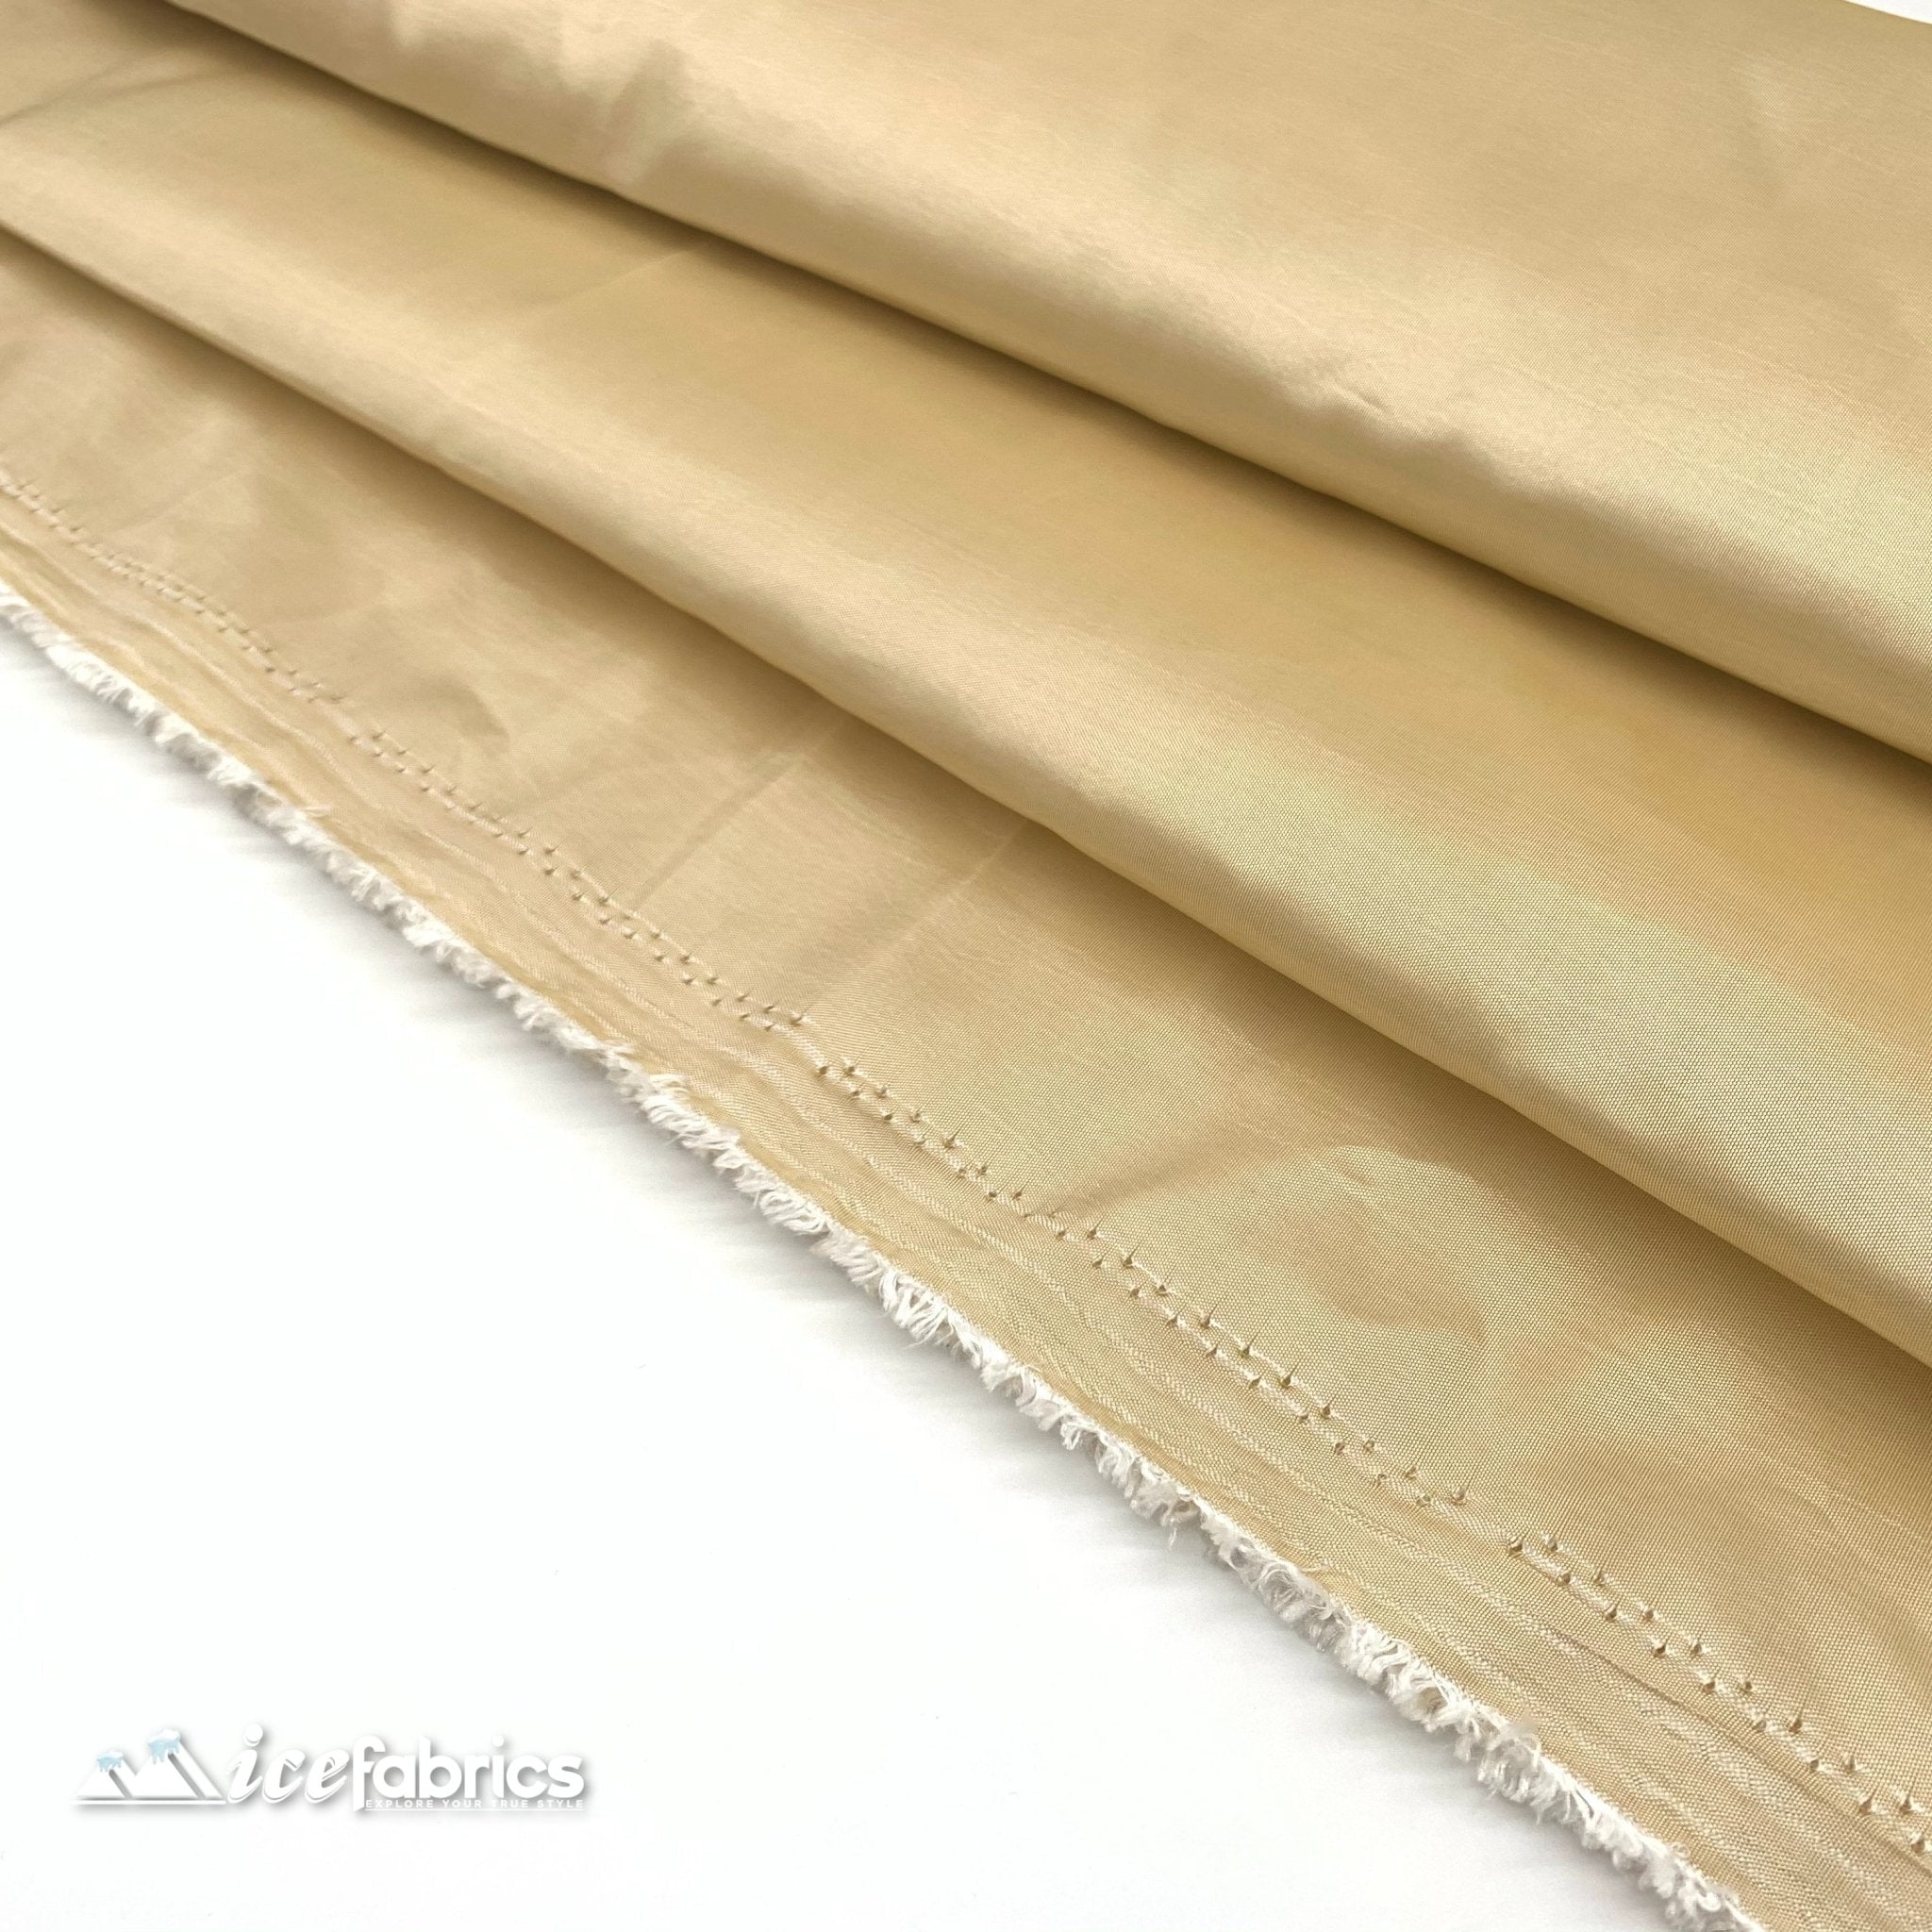 High Quality Solid Taffeta Fabric_ 60" Width_ By The YardTaffeta FabricICEFABRICICE FABRICSChampagneHigh Quality Solid Taffeta Fabric_ 60" Width_ By The YardTaffeta FabricICEFABRICICE FABRICSChampagneHigh Quality Solid Taffeta Fabric_ 60" Width_ By The Yard ICEFABRIC Champagne